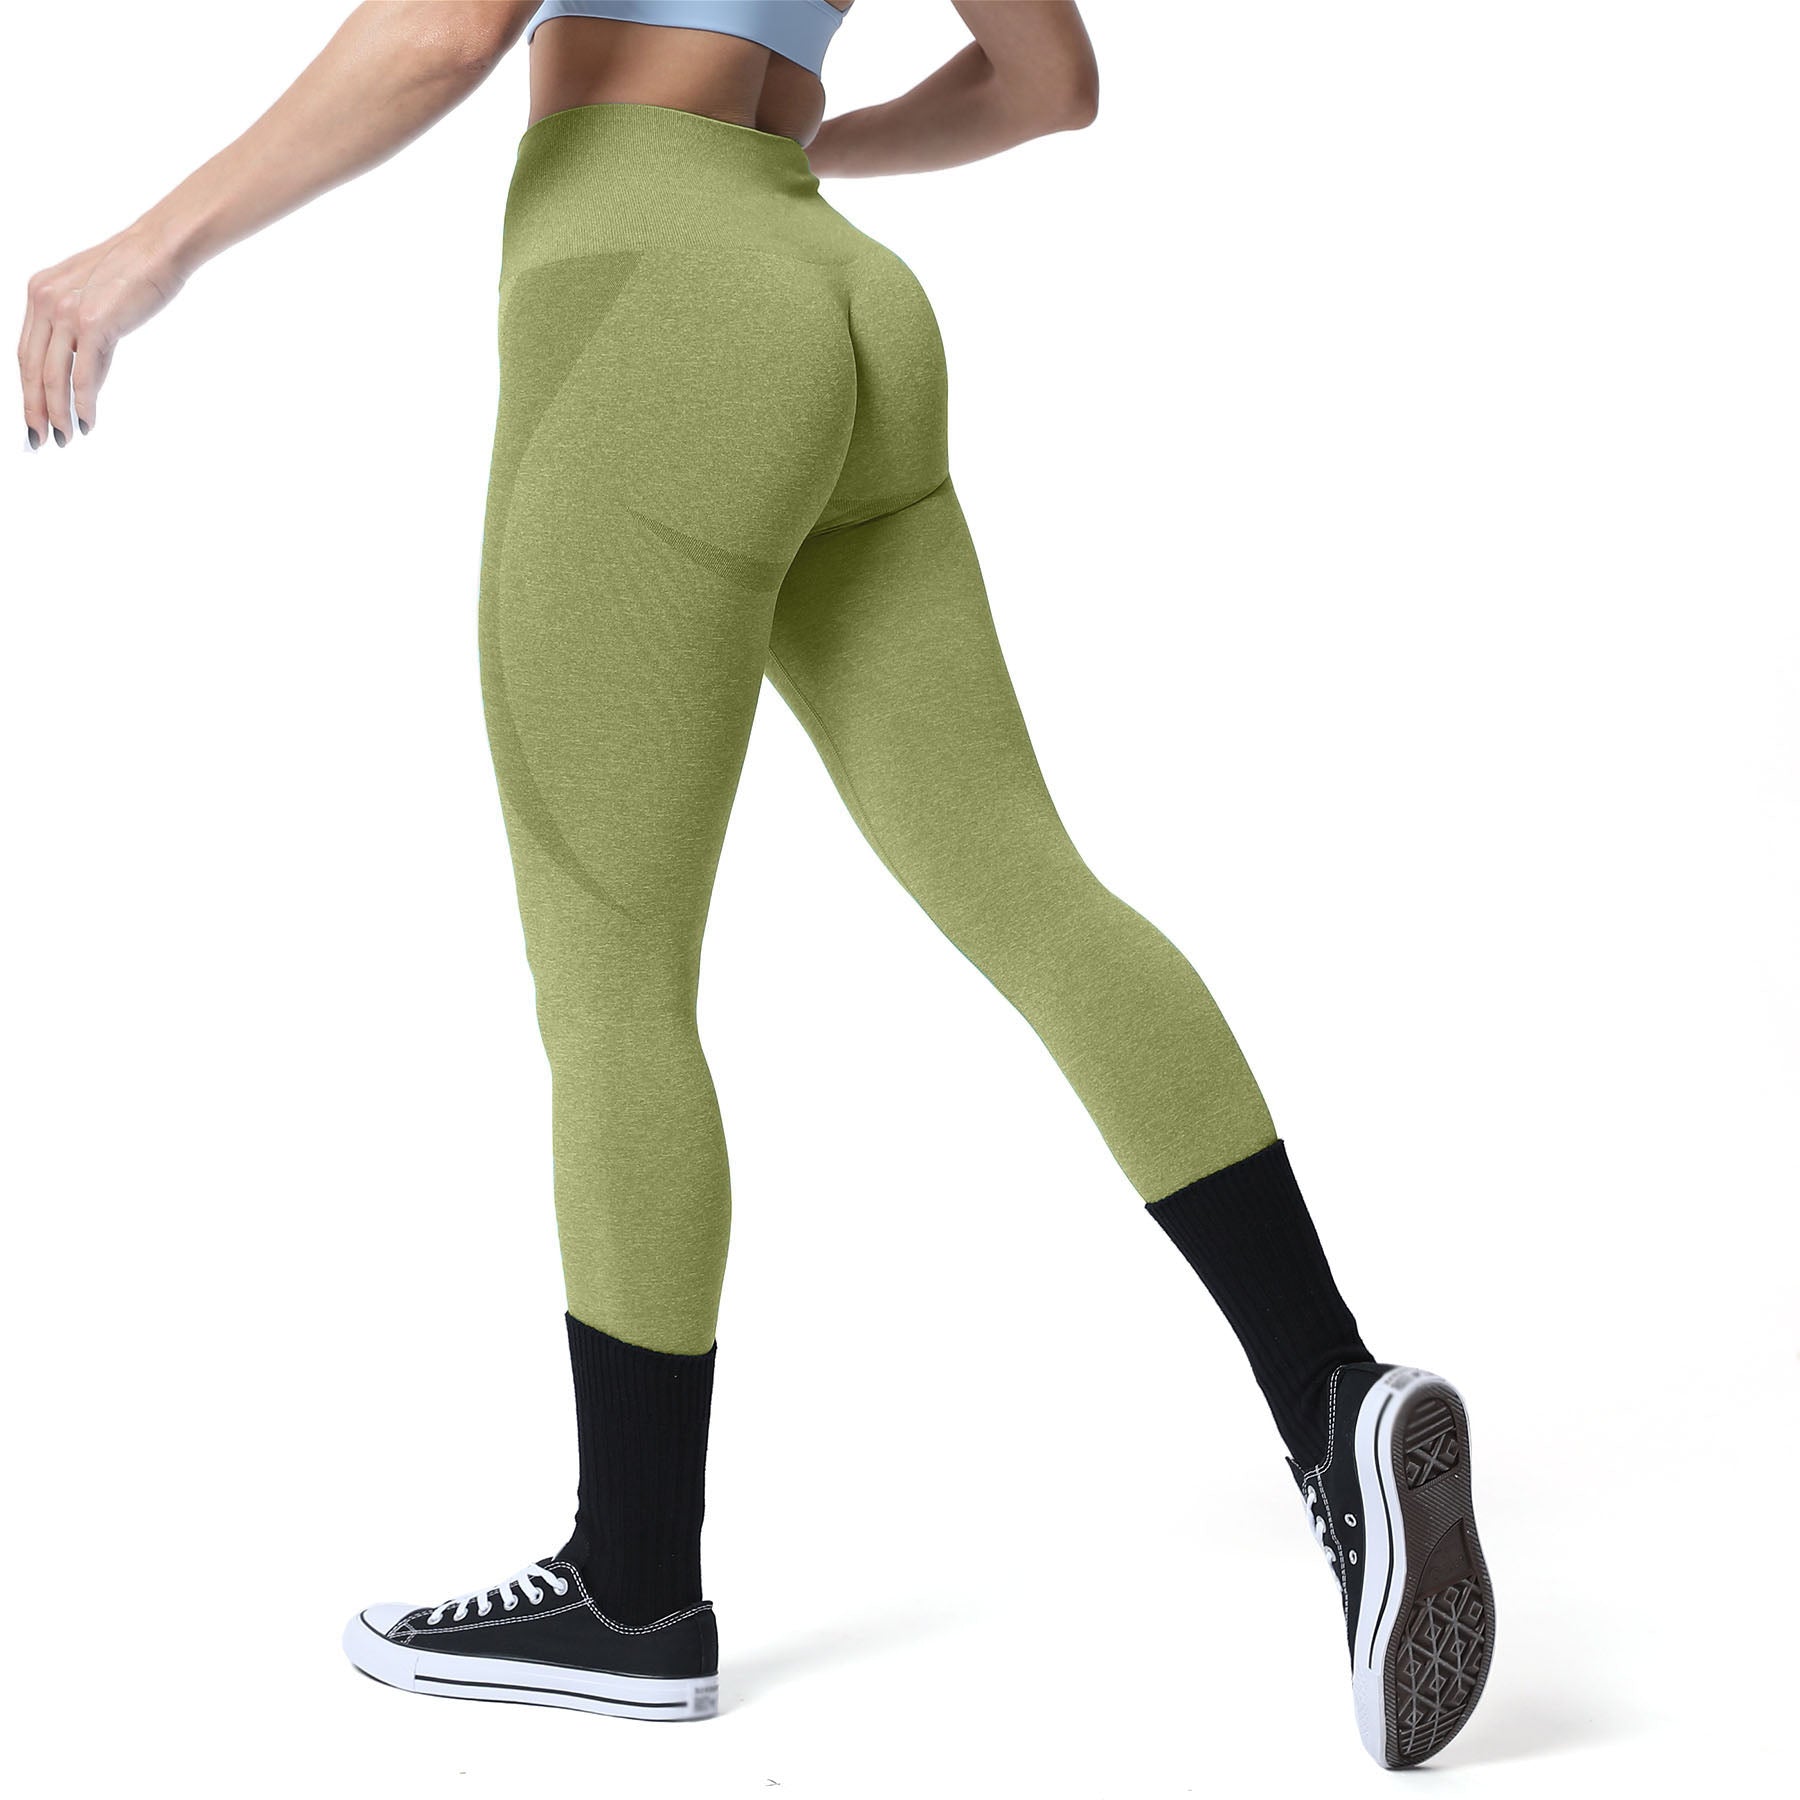 Aoxjox High Waisted Seamless Leggings Green Size XS - $29 (17% Off